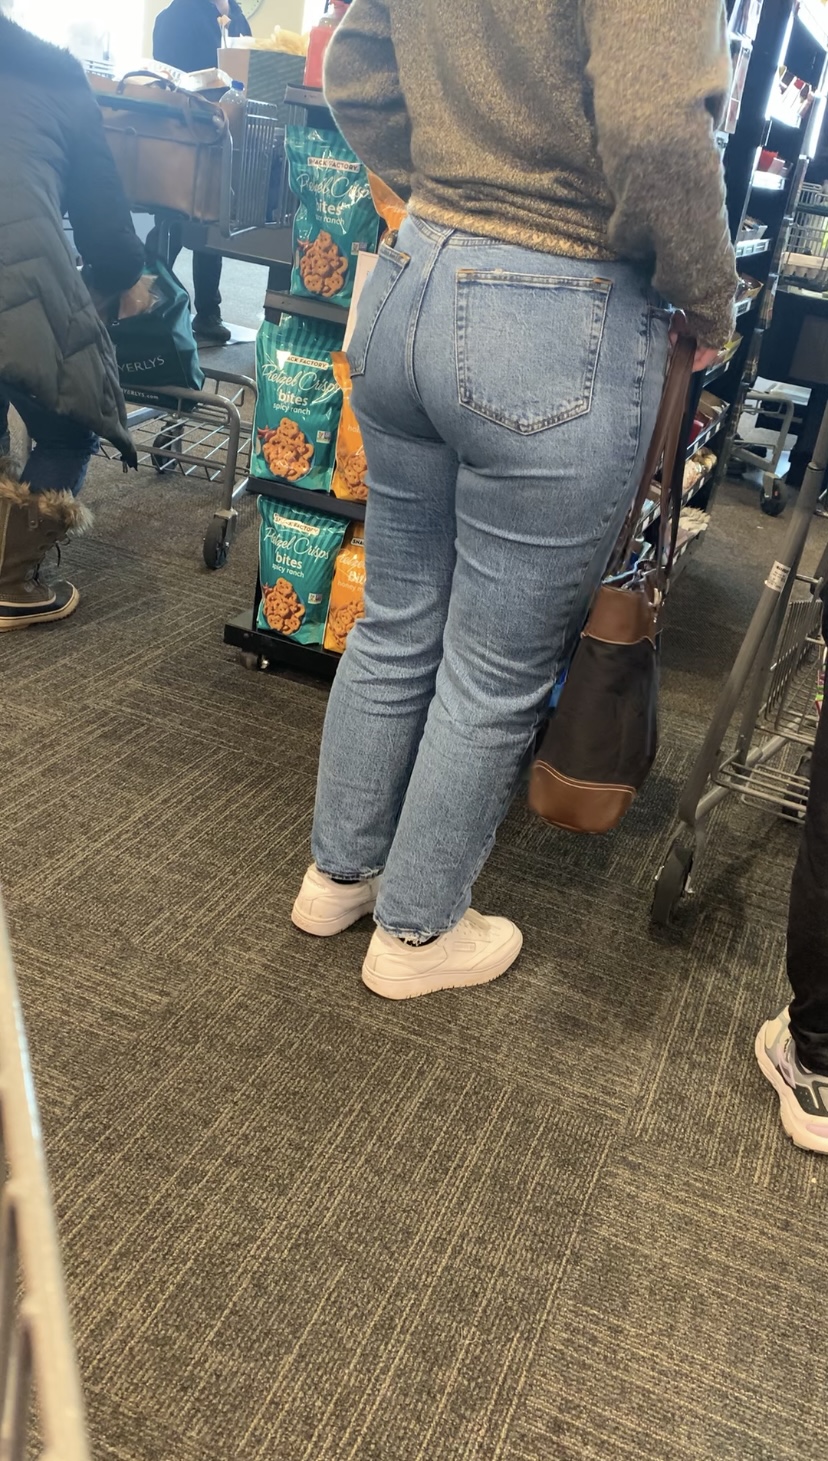 Standing in line at Grocery Store - Tight Jeans - Forum